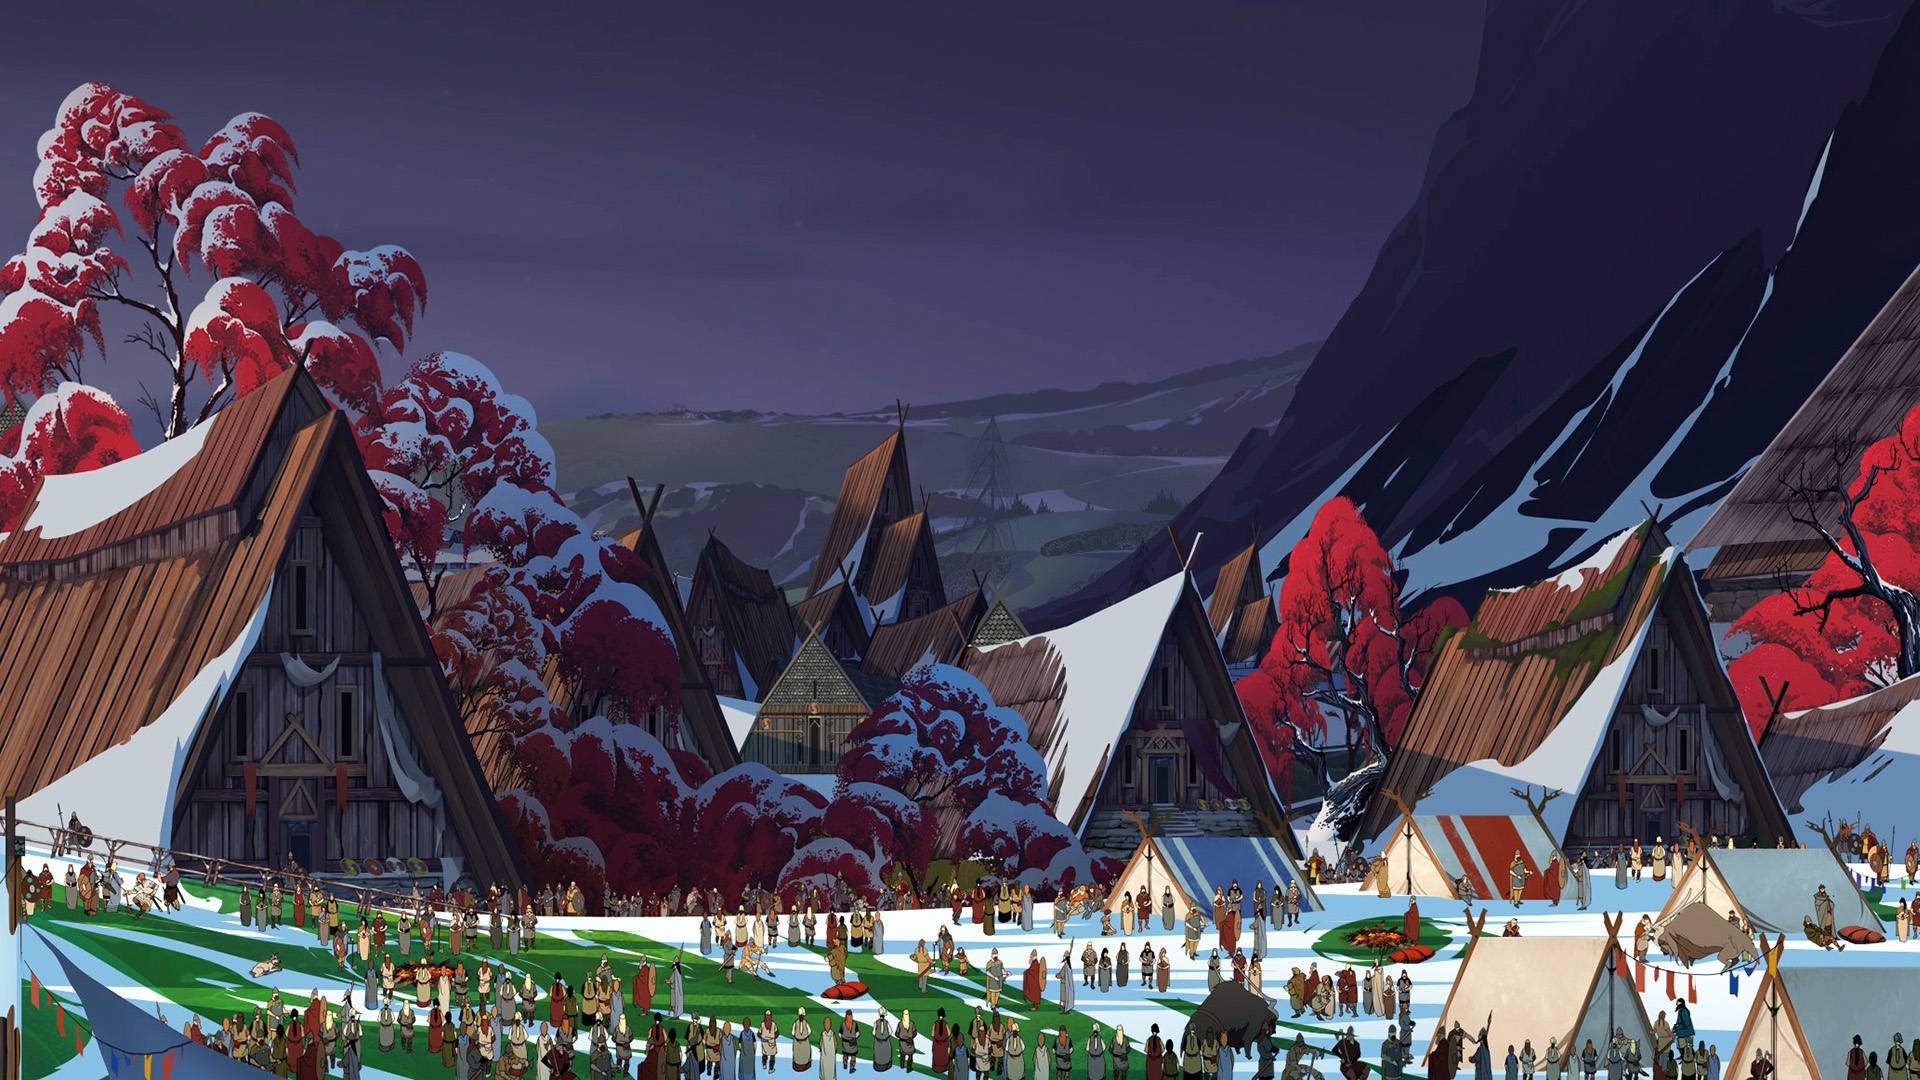 The Banner Saga The Banner Saga 3 Landscape Town Video Game Art Red Trees Snow People Video Games Cr 1920x1080